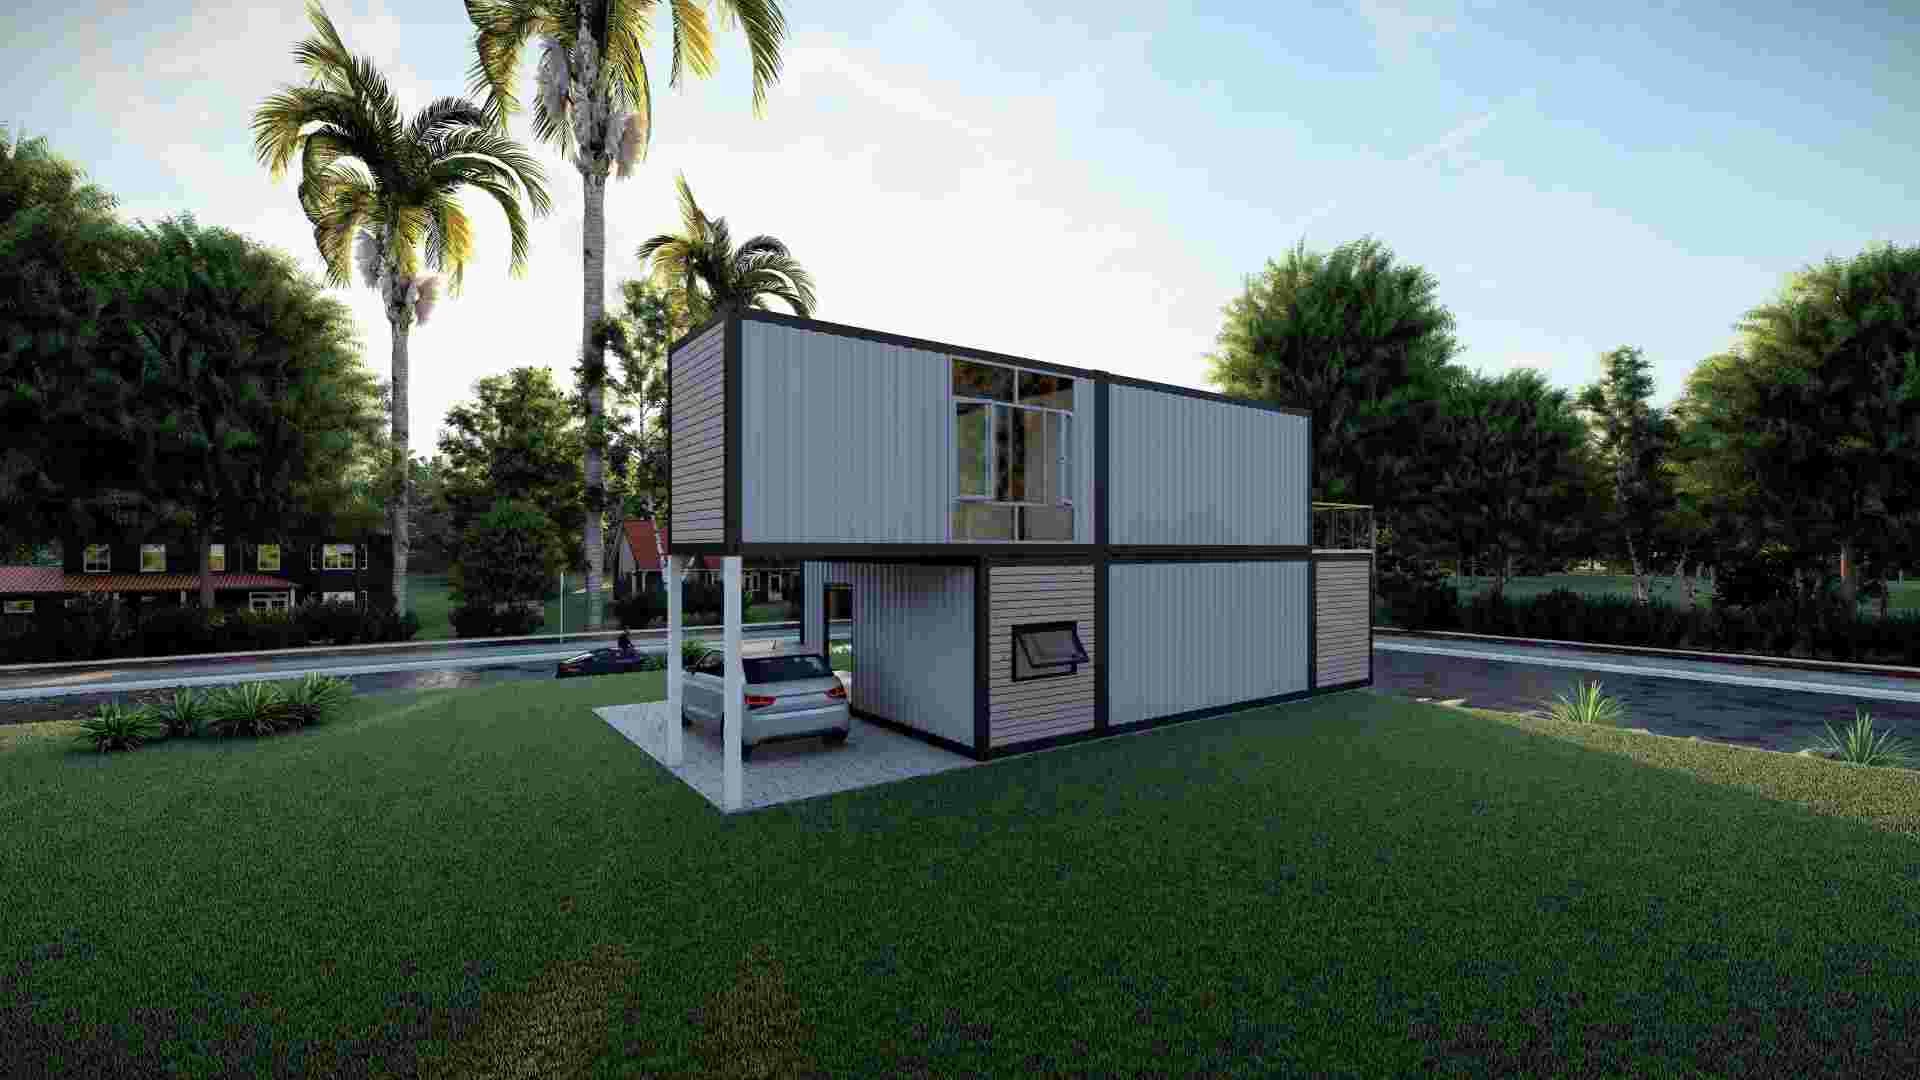 Prefab Build Small Modern Steel Structure Container Houses Freight Houses -2X06